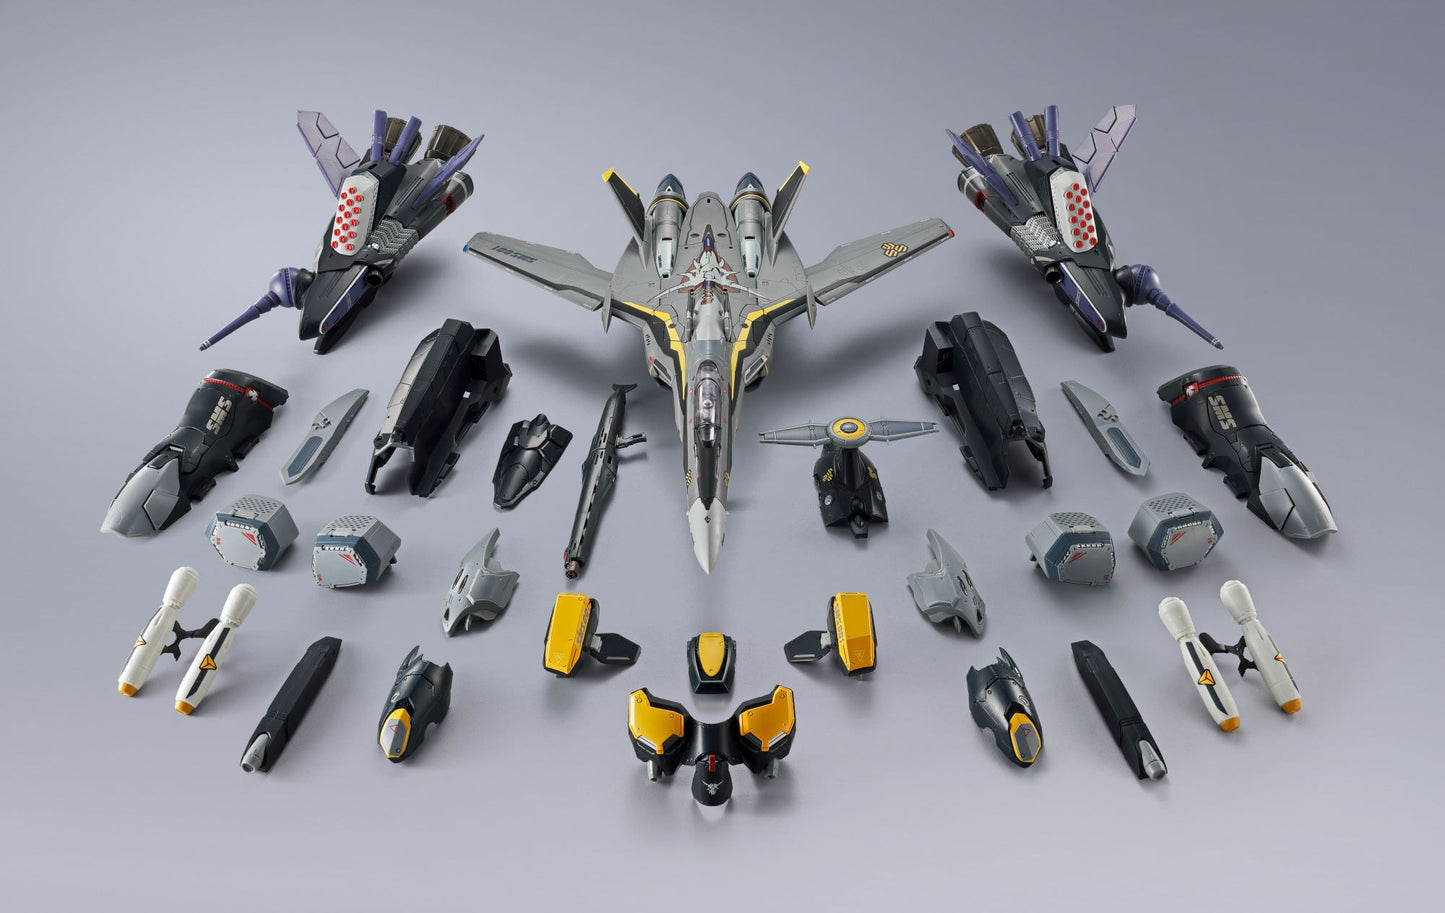 Macross DX CHOGOKIN VF-25S Armored Messiah Valkyrie (Ozma Lee) Revival Ver. showing all of the accessories